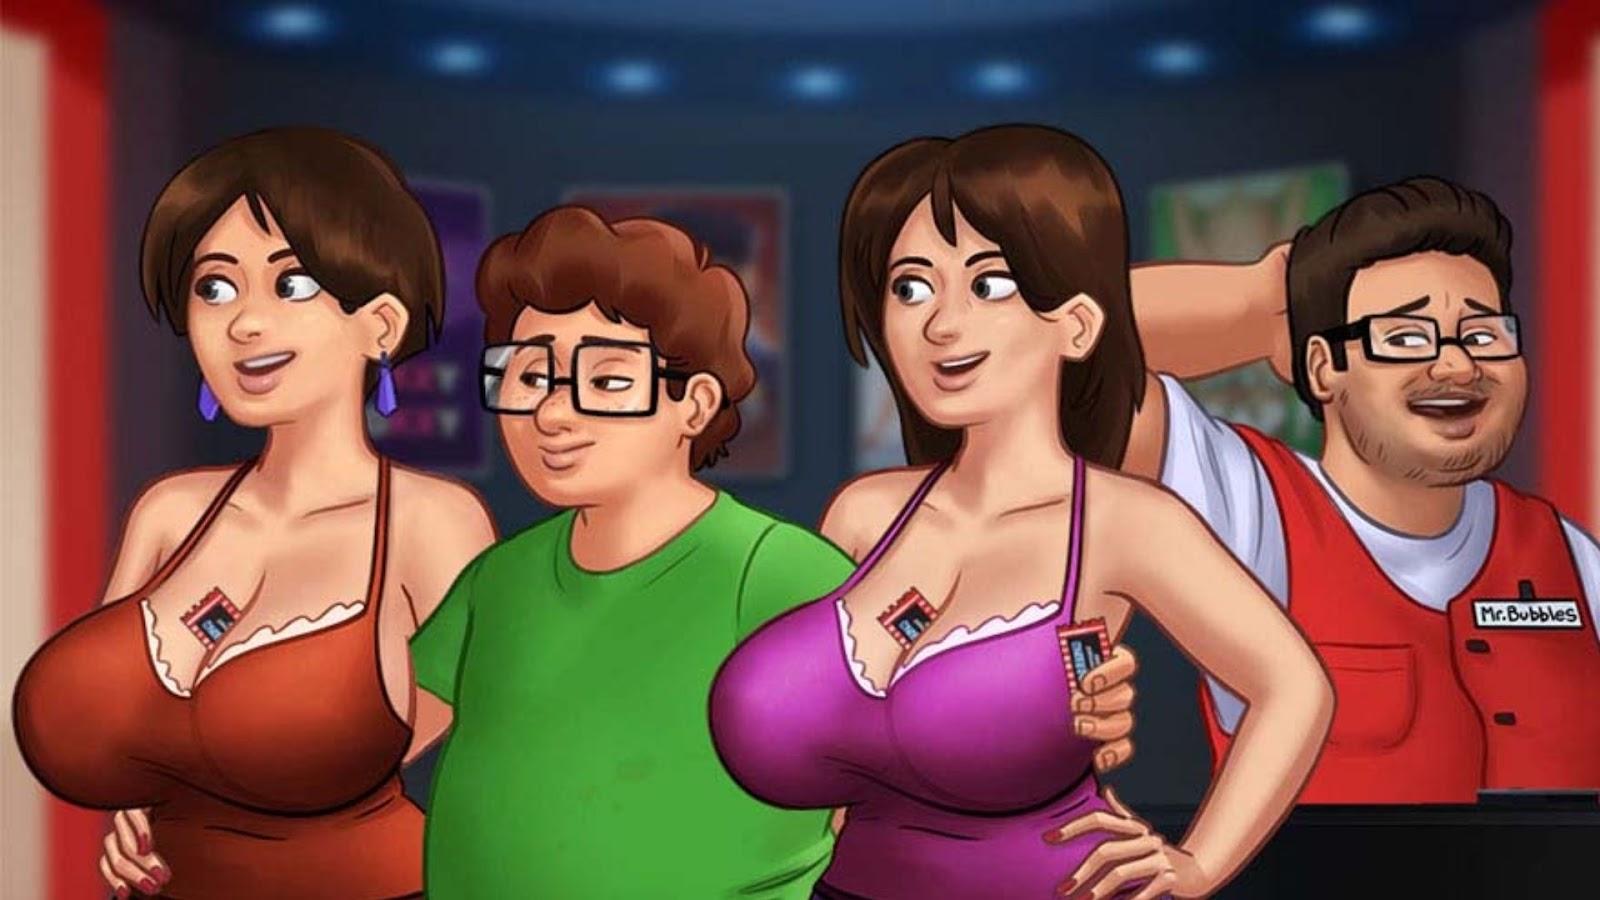 Games Porn - Top Porn Games with Best Gameplay Scenes for Adults-LDPlayer's  Choice-LDPlayer